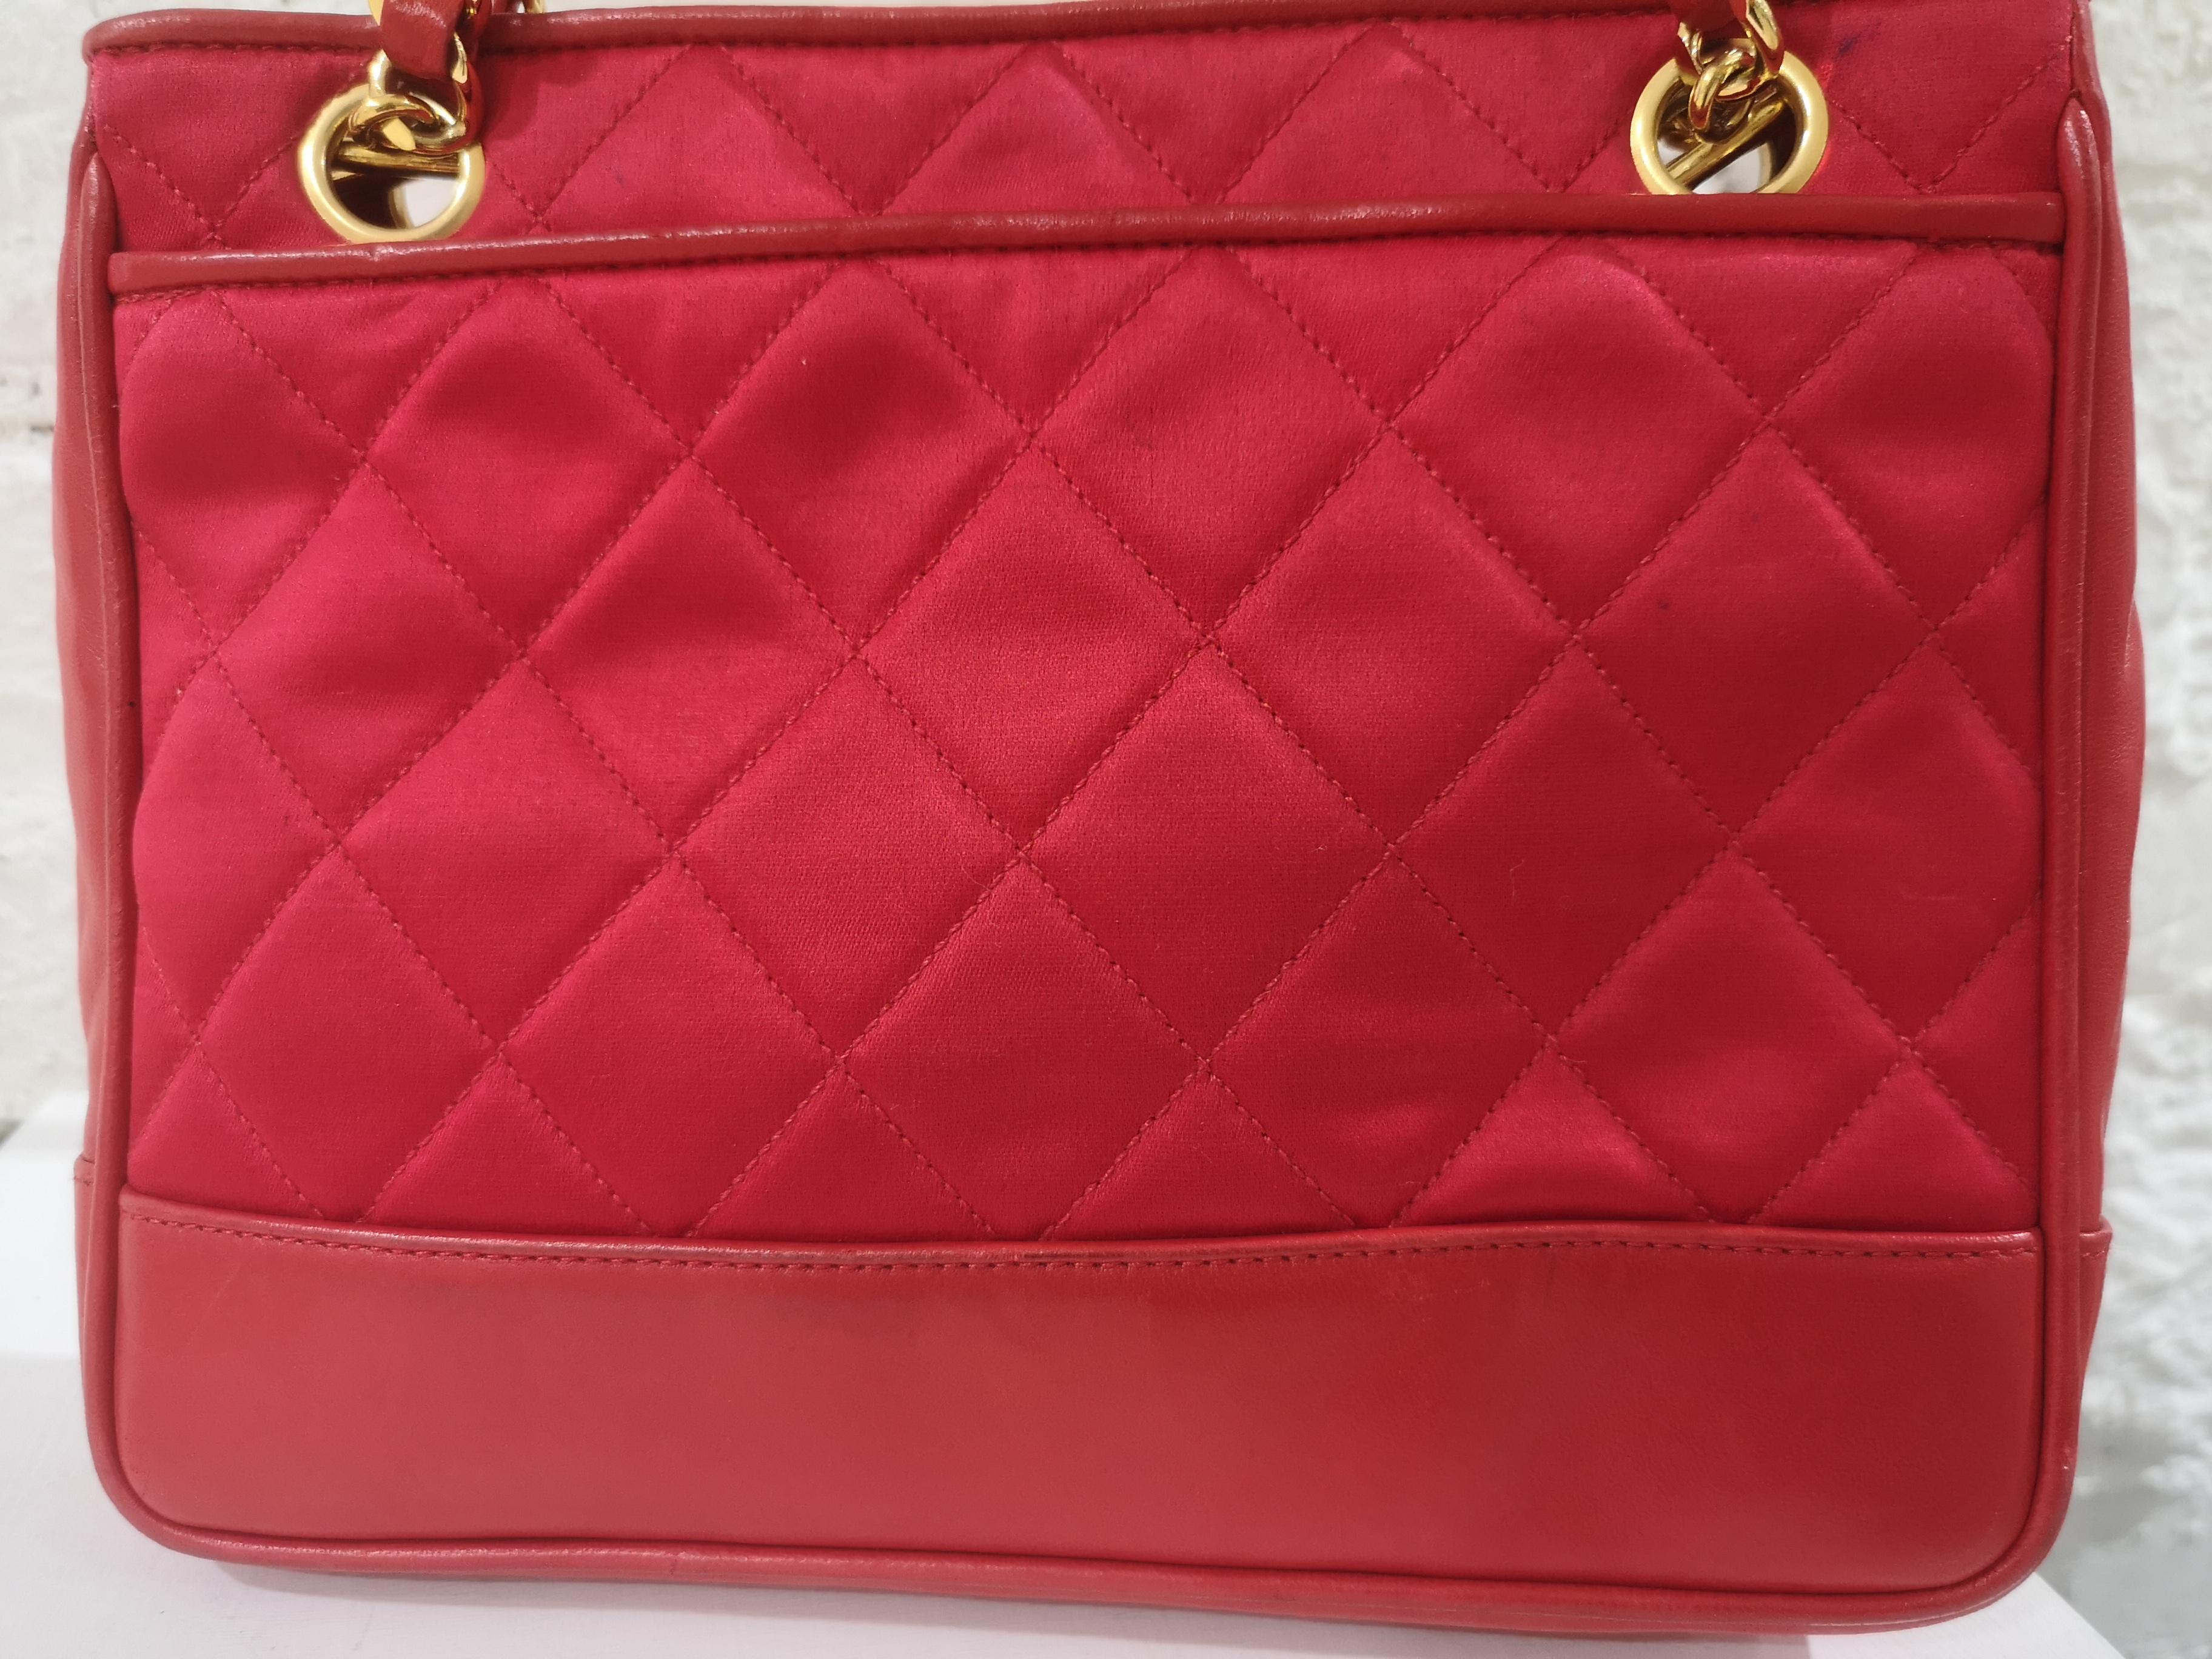 Chanel red leather and fabric shoulder bag 2